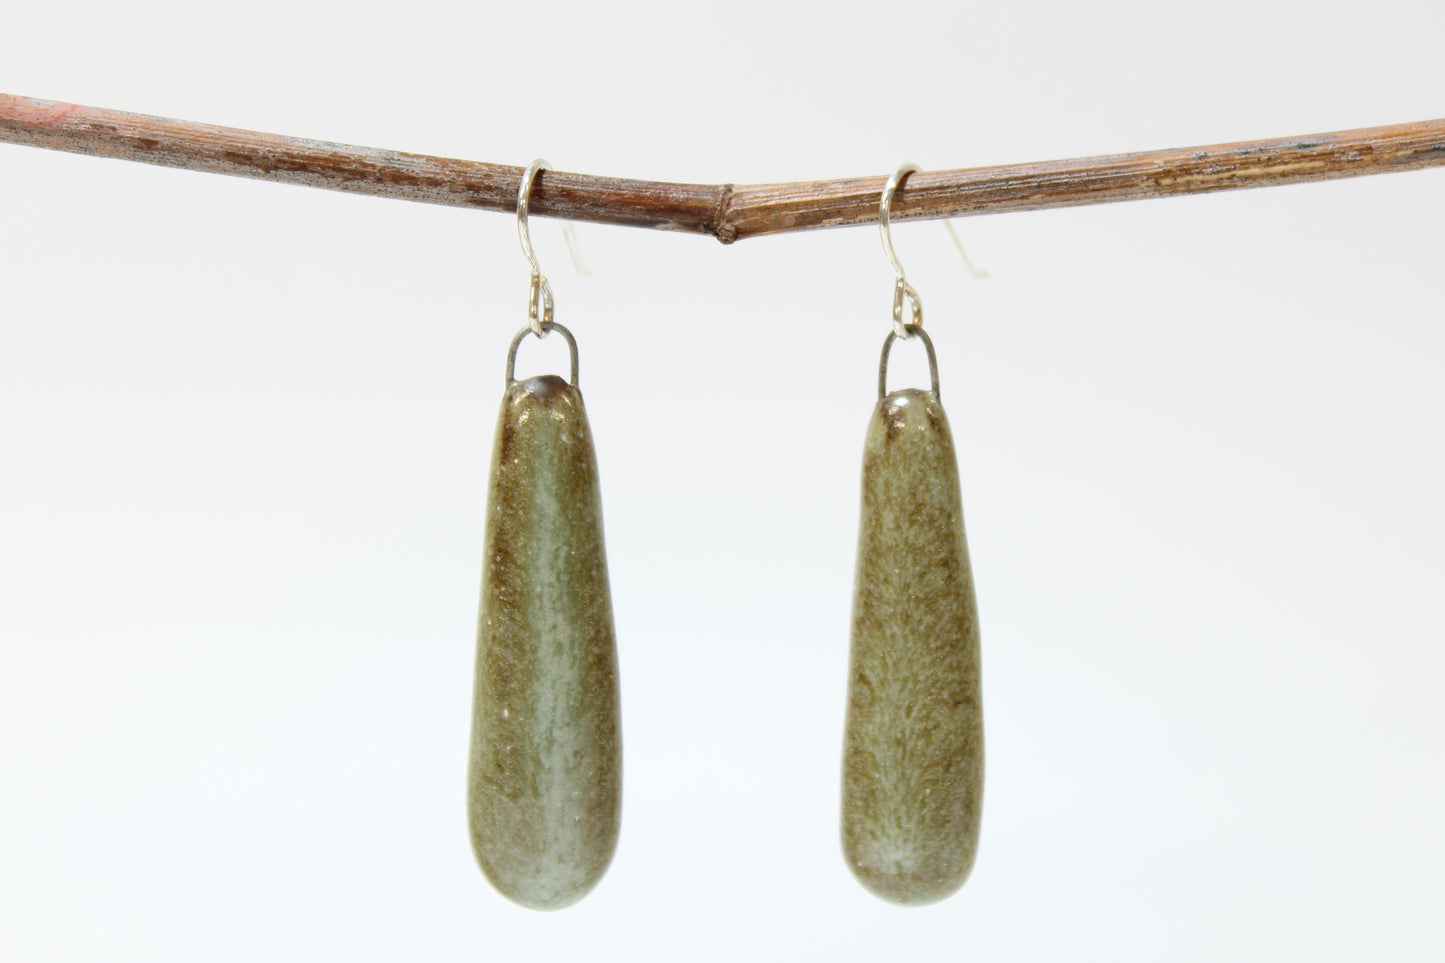 224. Dangly Earrings with Drippy Turquoise Glaze. 2" x 0.5"